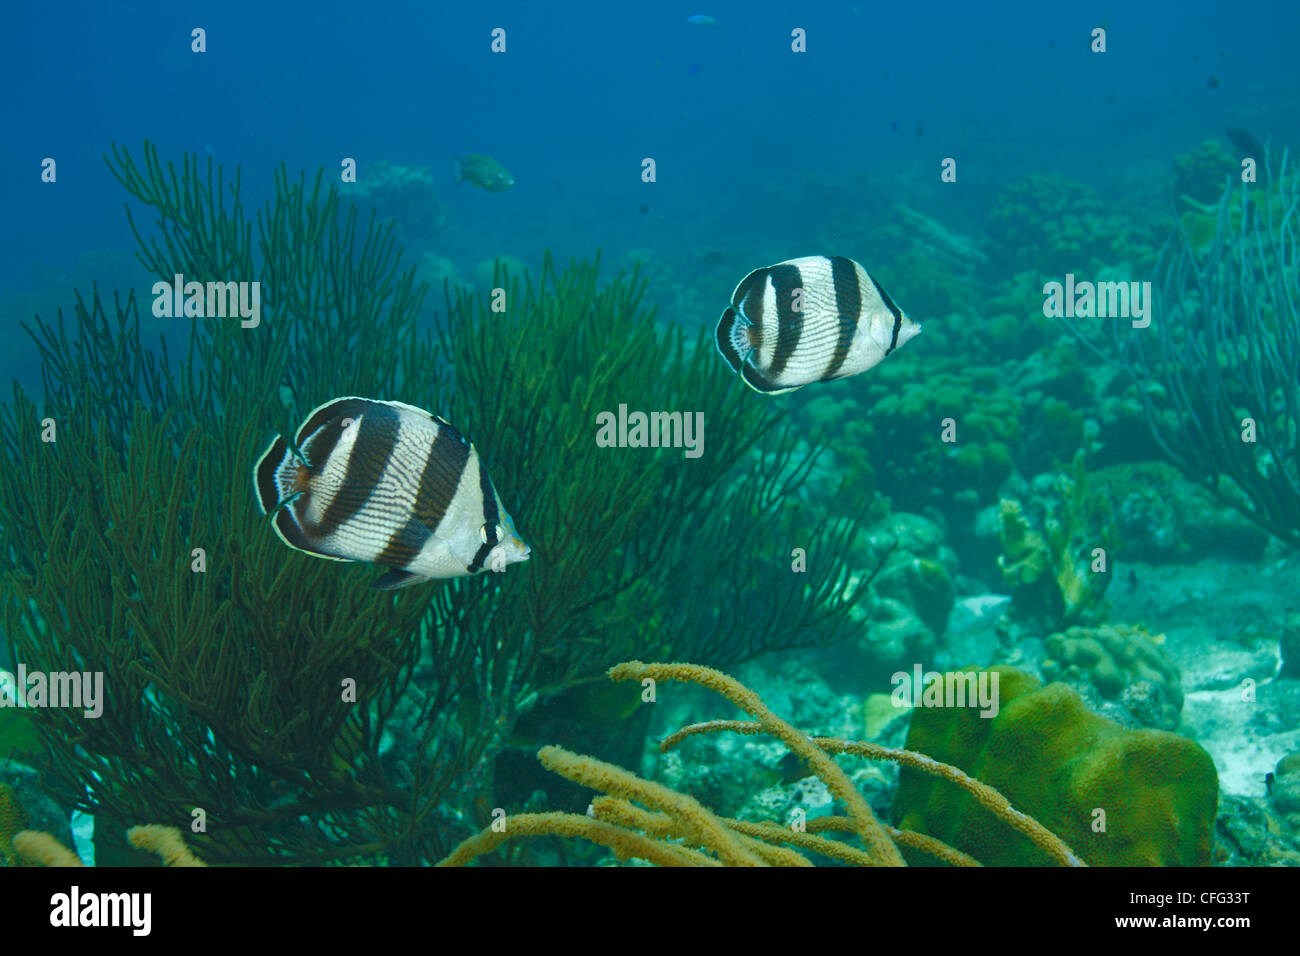 A pair of banded butterflyfish, Chaetodon striatus, cruises a reef. Stock Photo